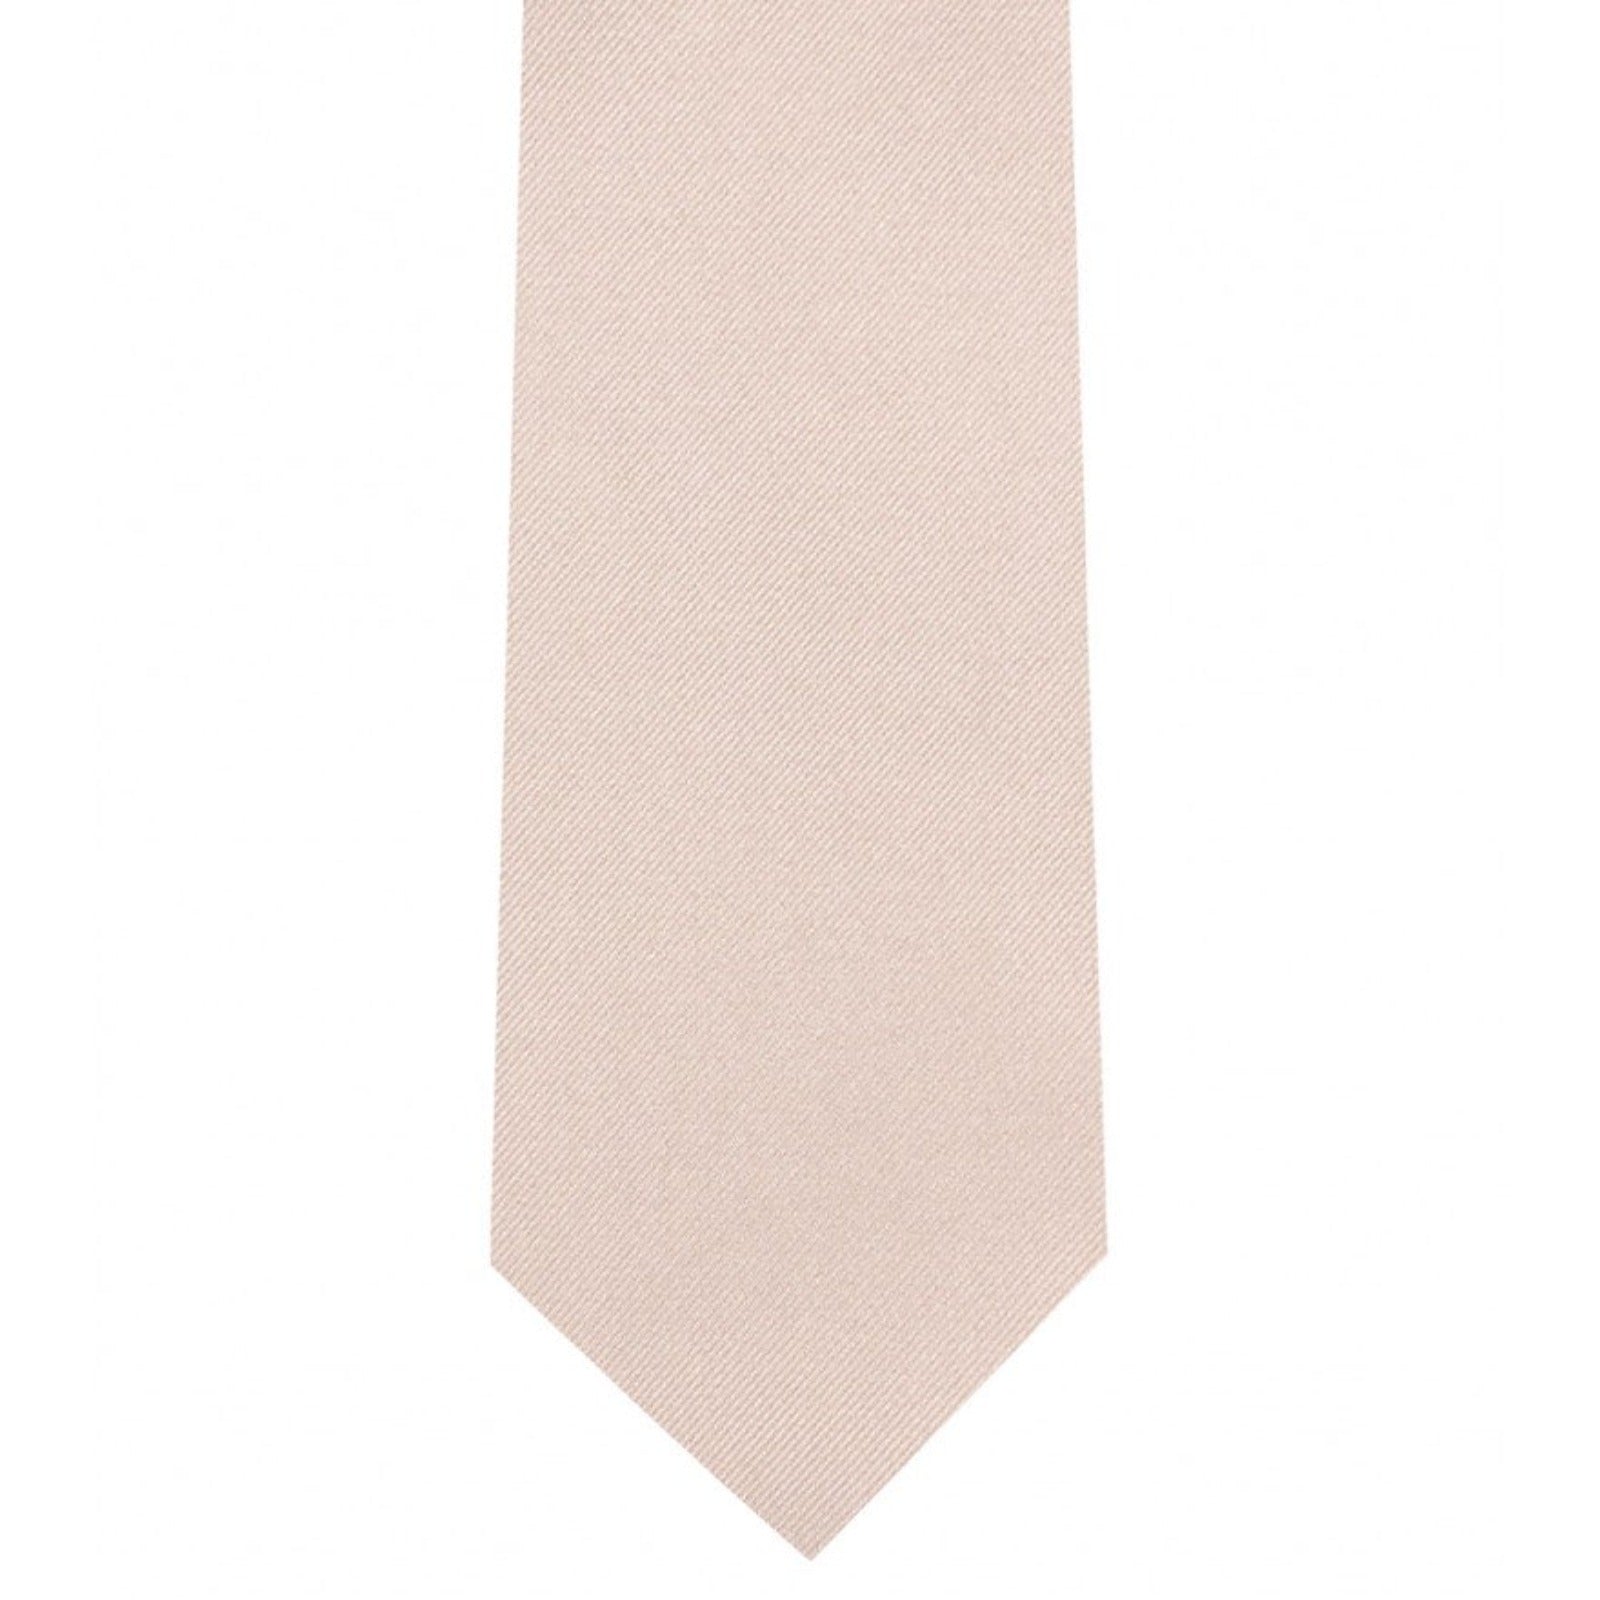 Classic Light Blush Tie Ultra Skinny tie width 2.25 inches With Matching Pocket Square | KCT Menswear